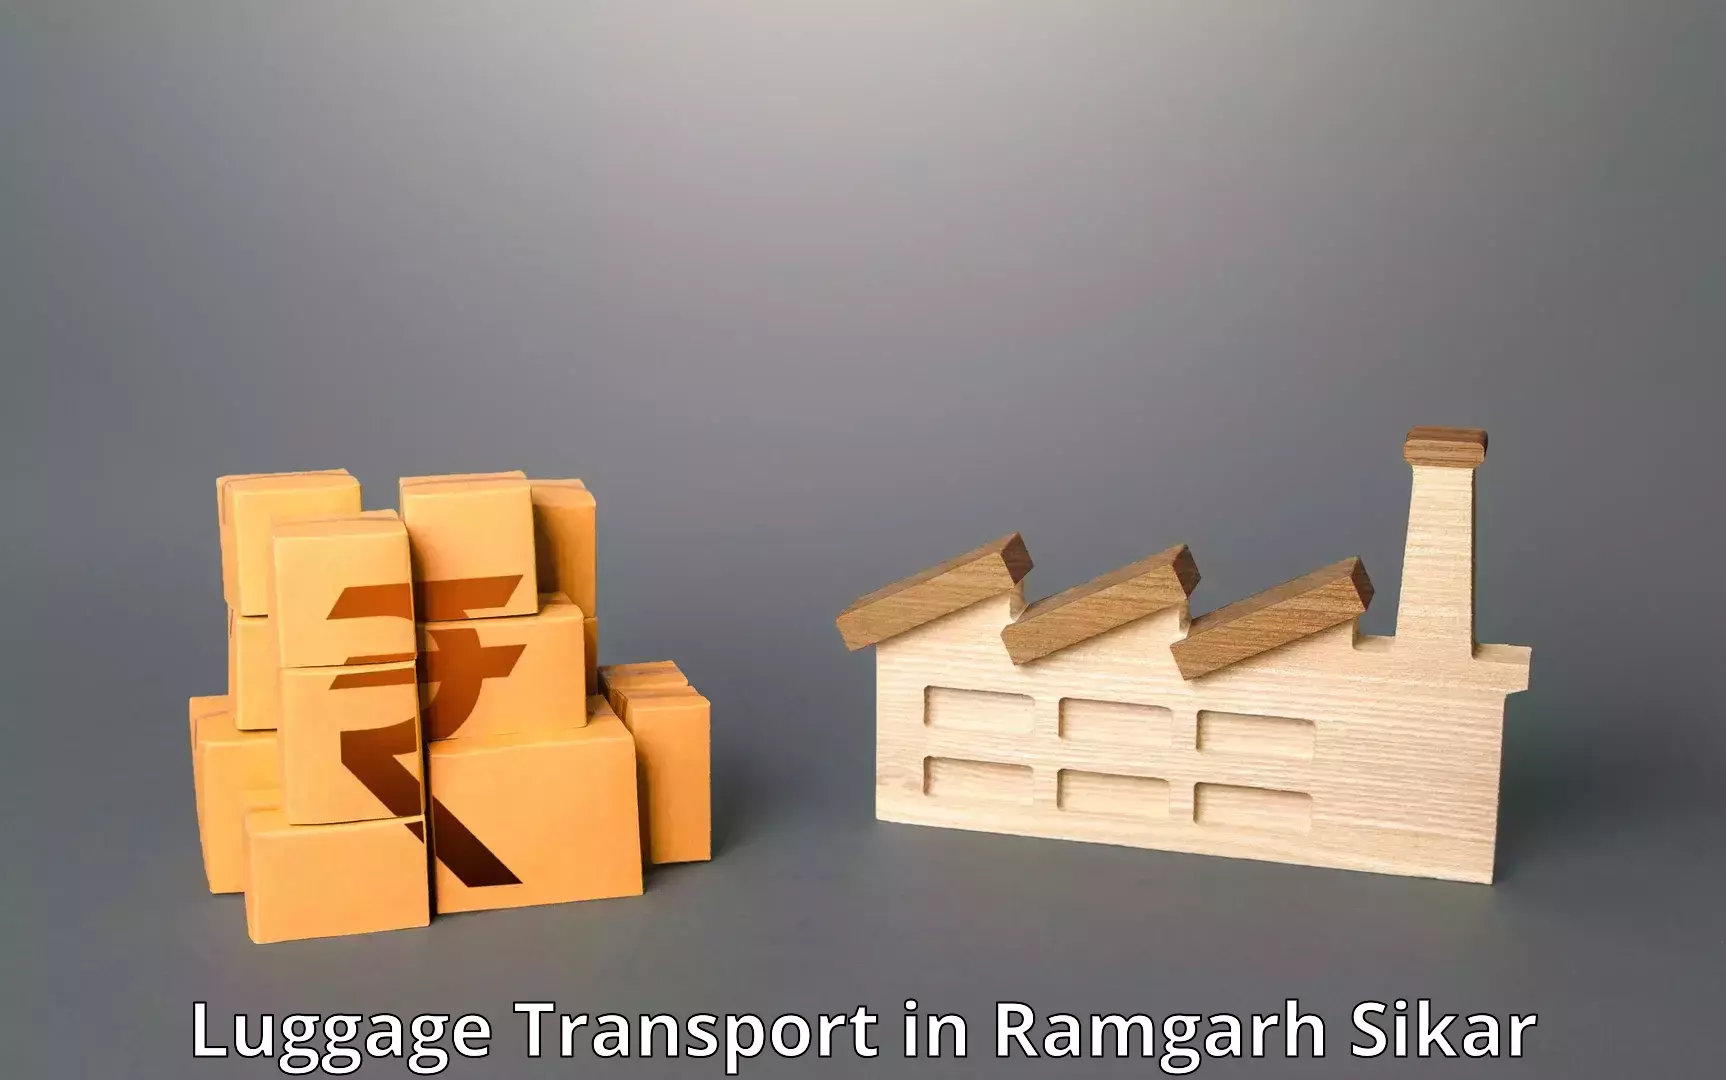 Baggage transport professionals in Ramgarh Sikar